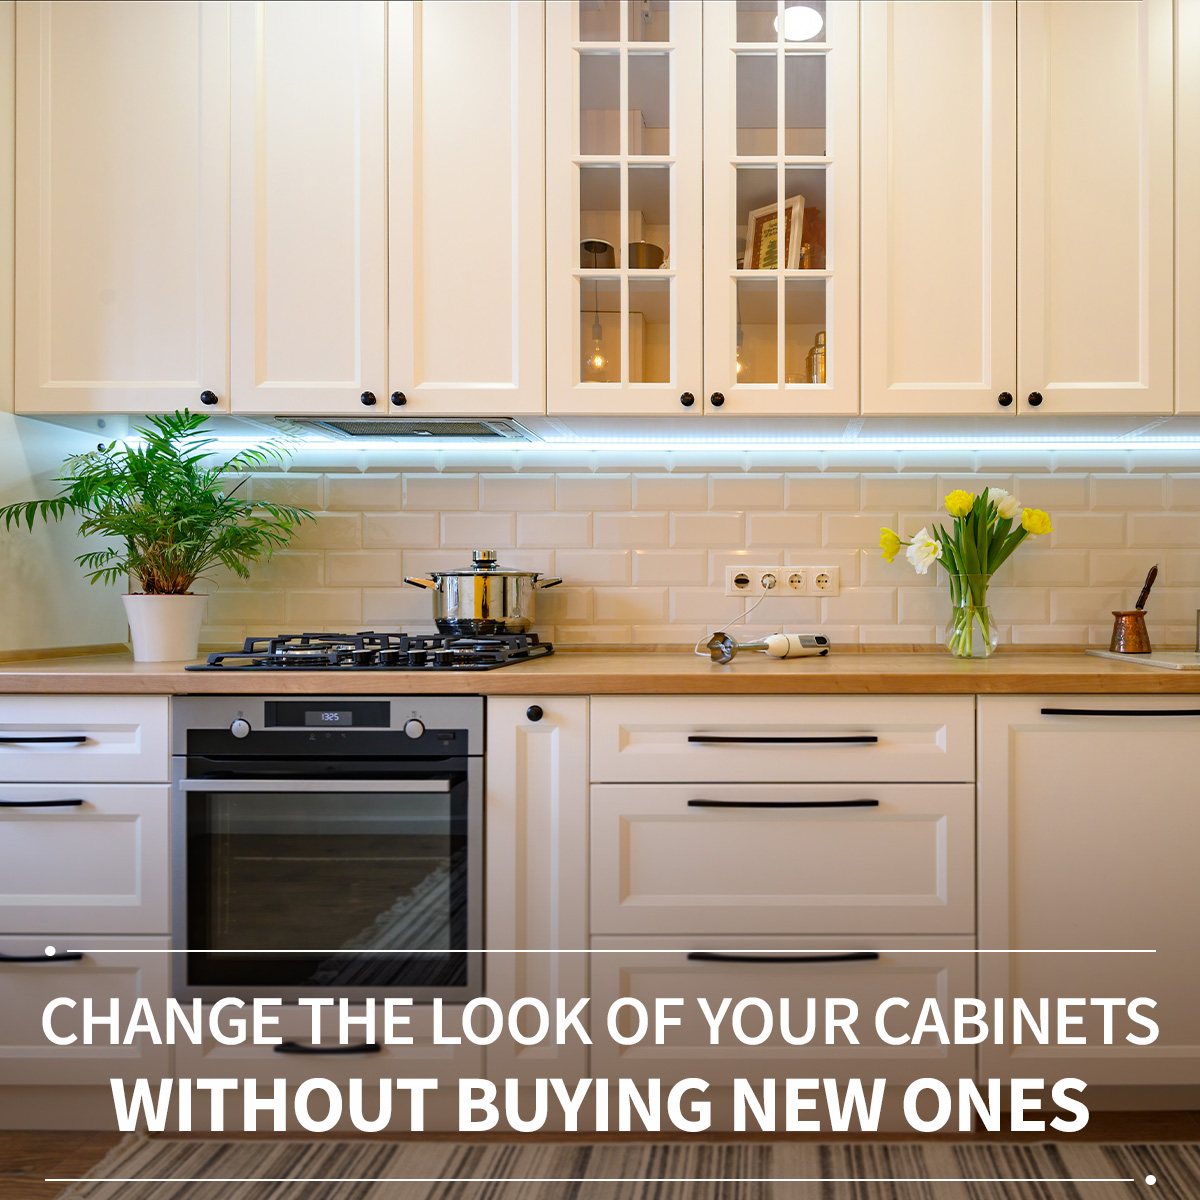 Change the look of your kitchen without buying new cabinets